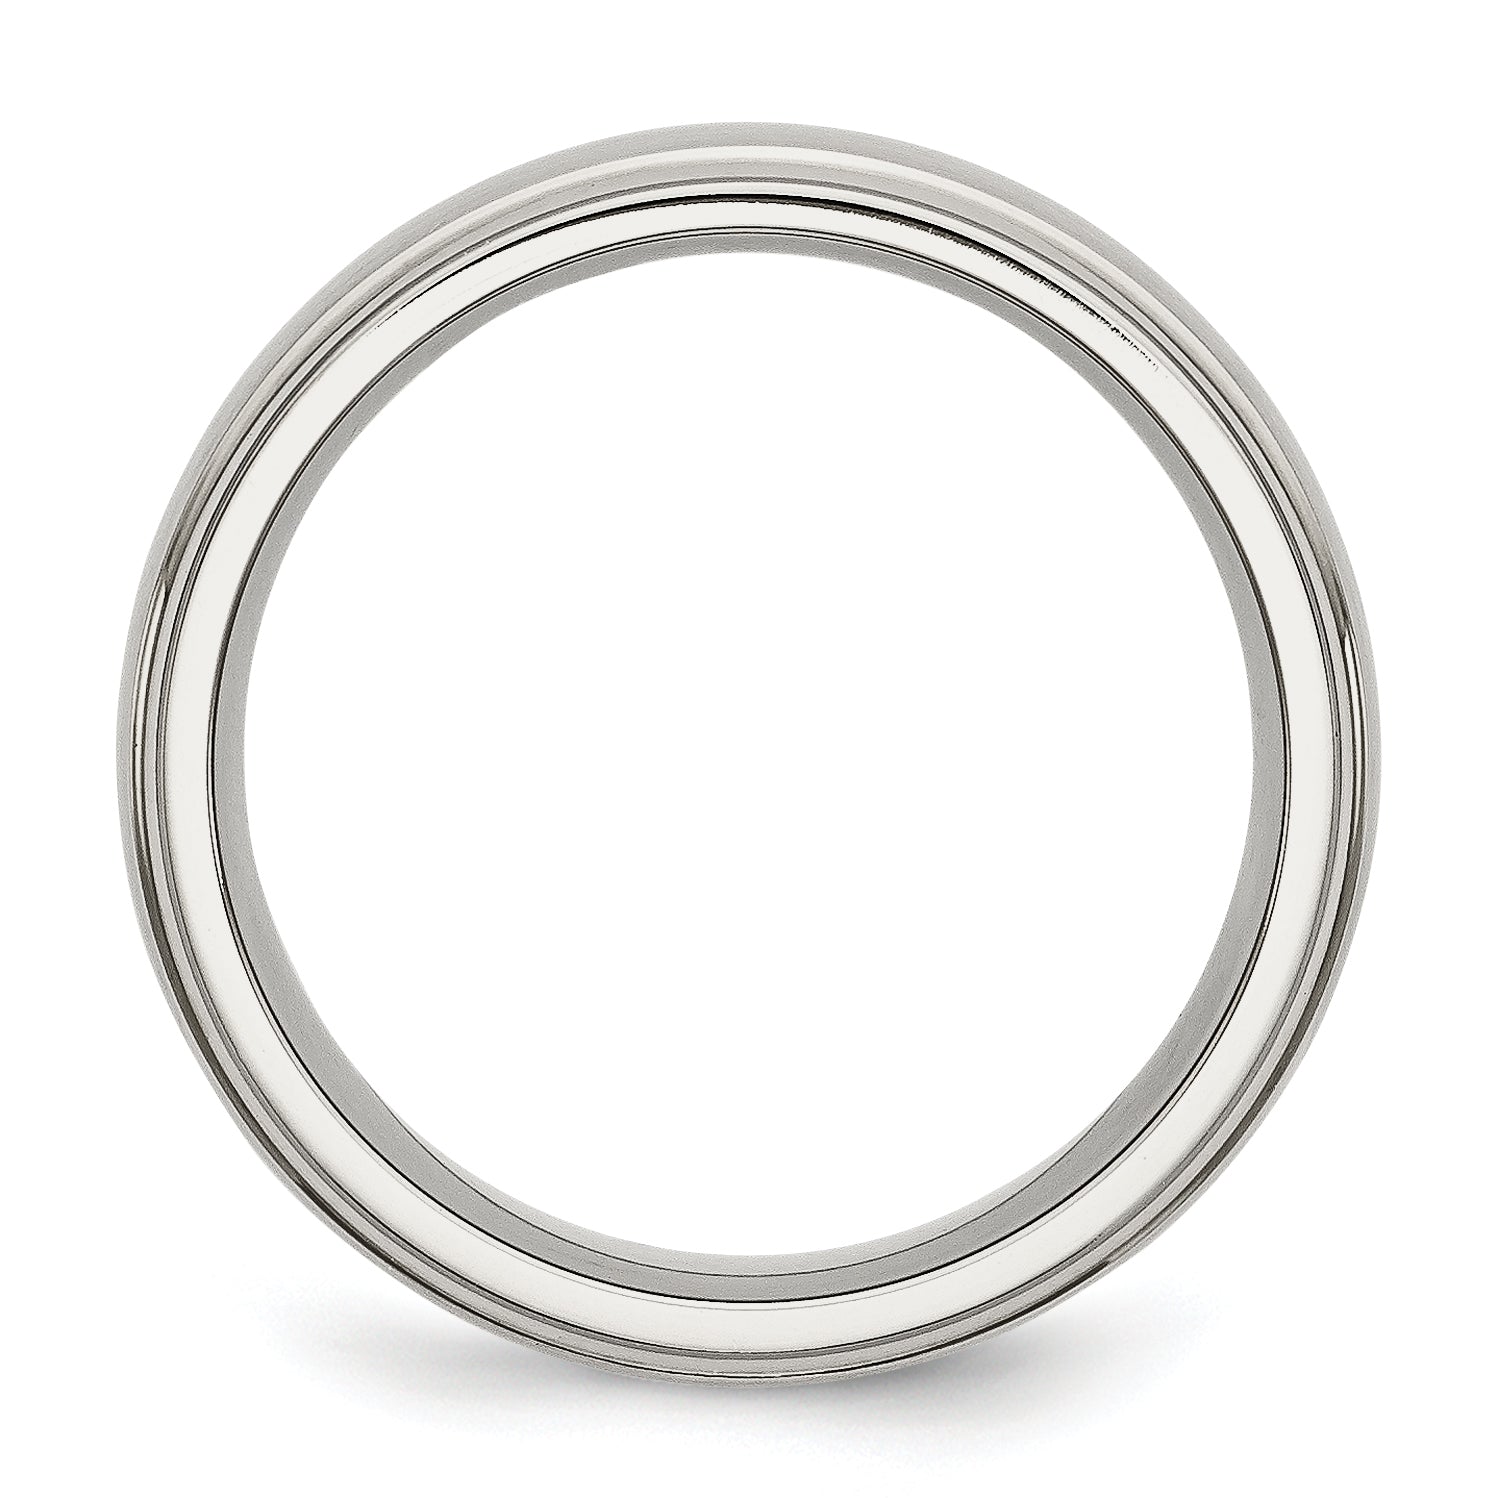 Stainless Steel Polished with Brushed Center 7mm Ridged Edge Band